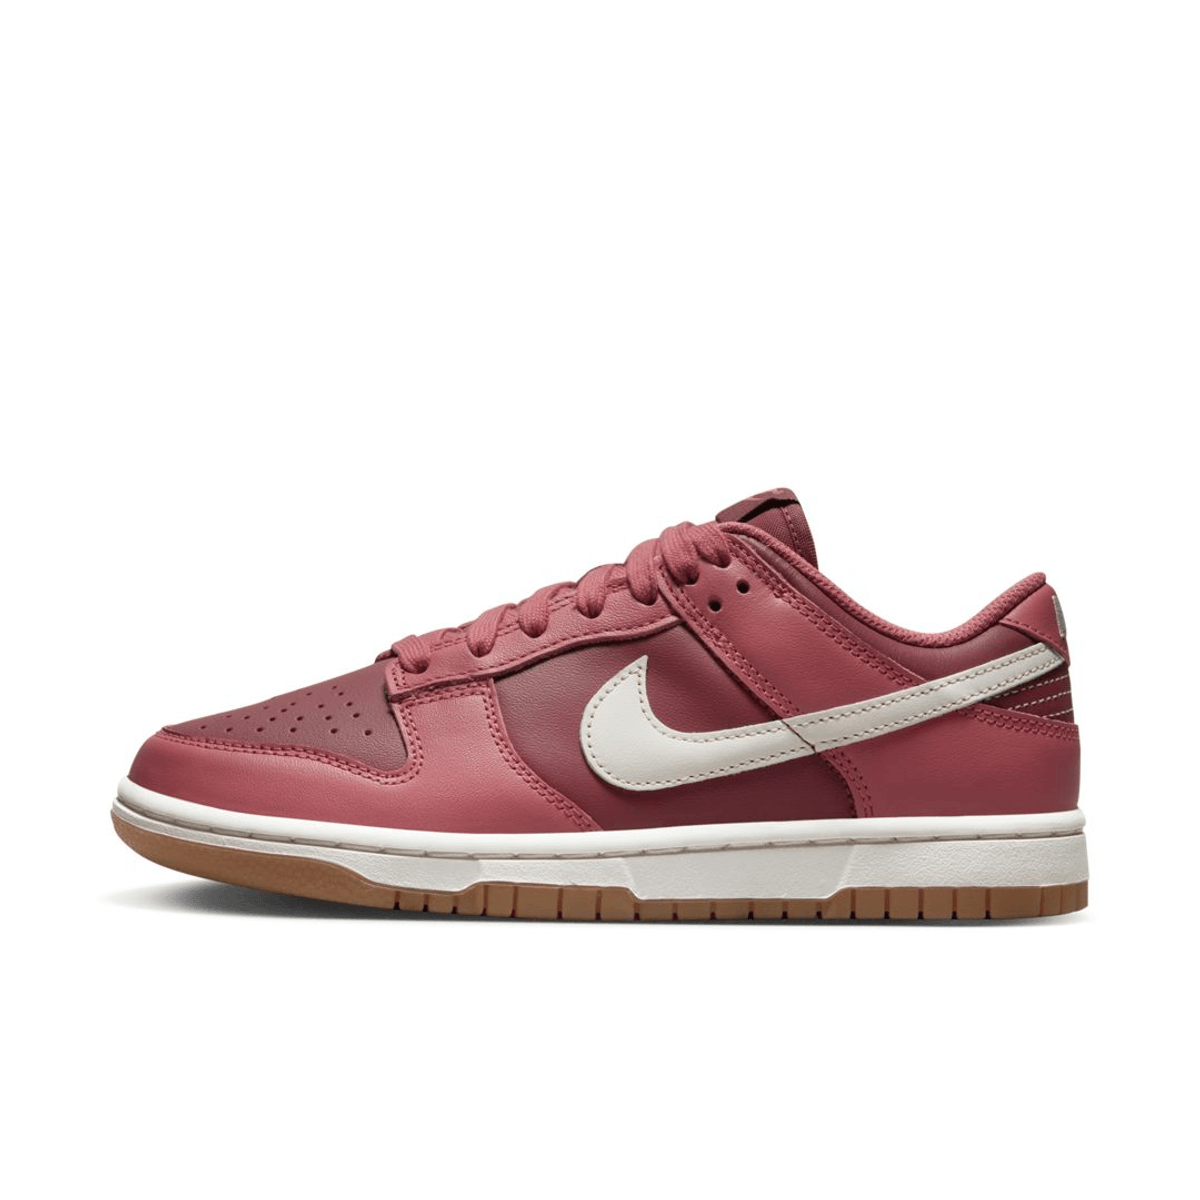 First Look At The Nike Dunk Low "Desert Berry"